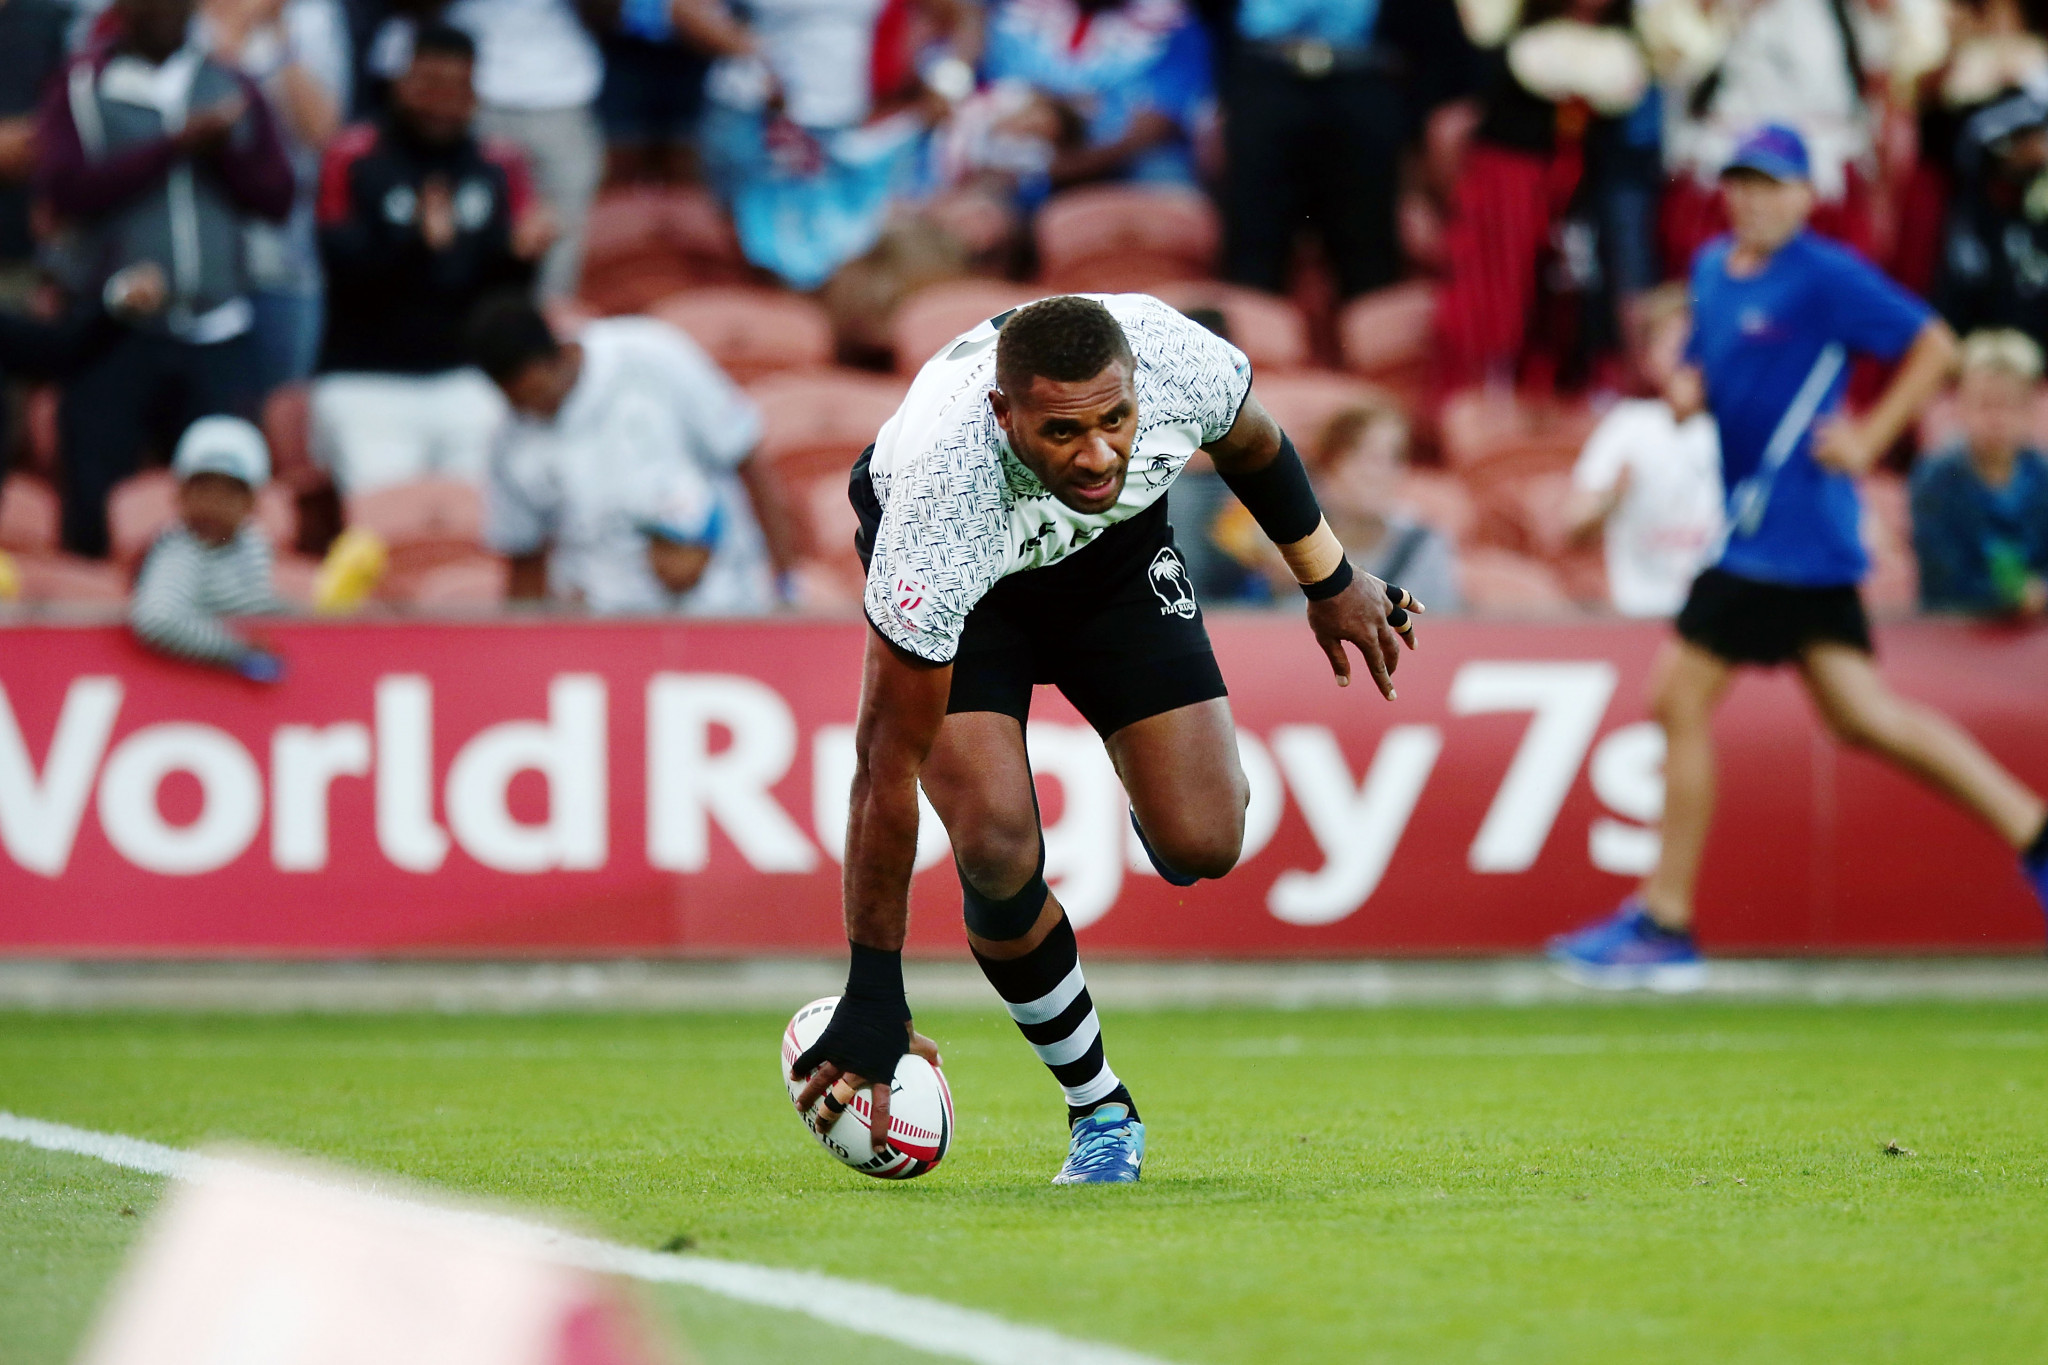 Fiji name final men's and women's rugby sevens squads for Gold Coast 2018 Commonwealth Games